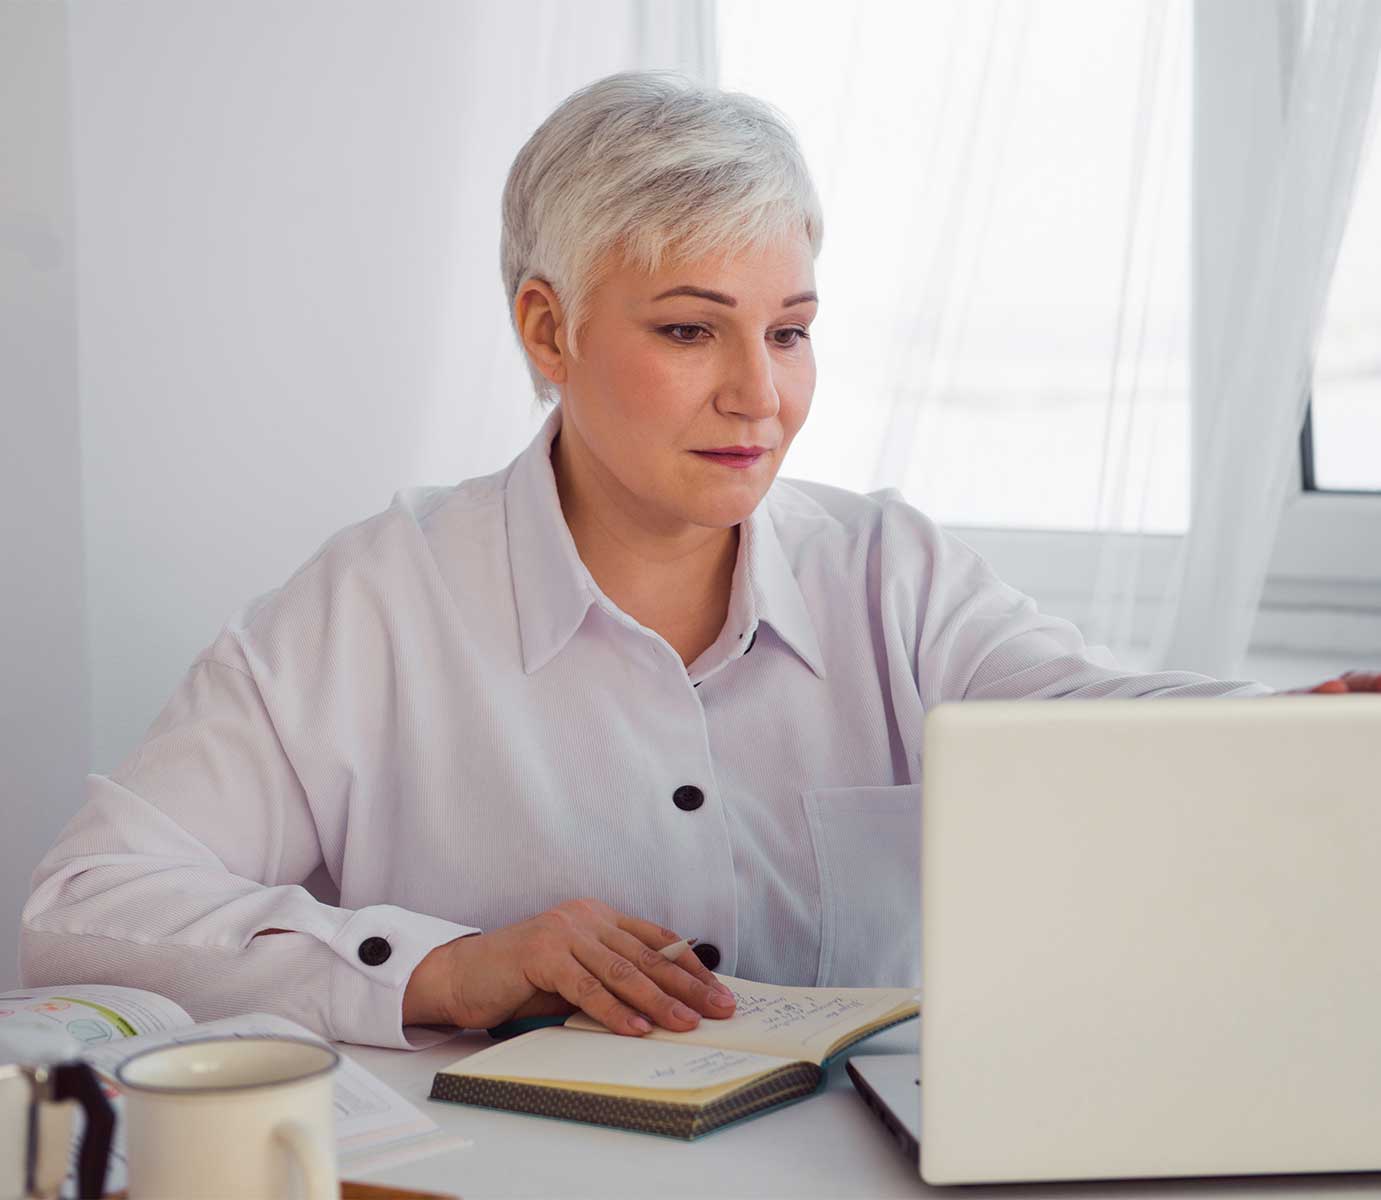 grey haired businesswoman working with a computer